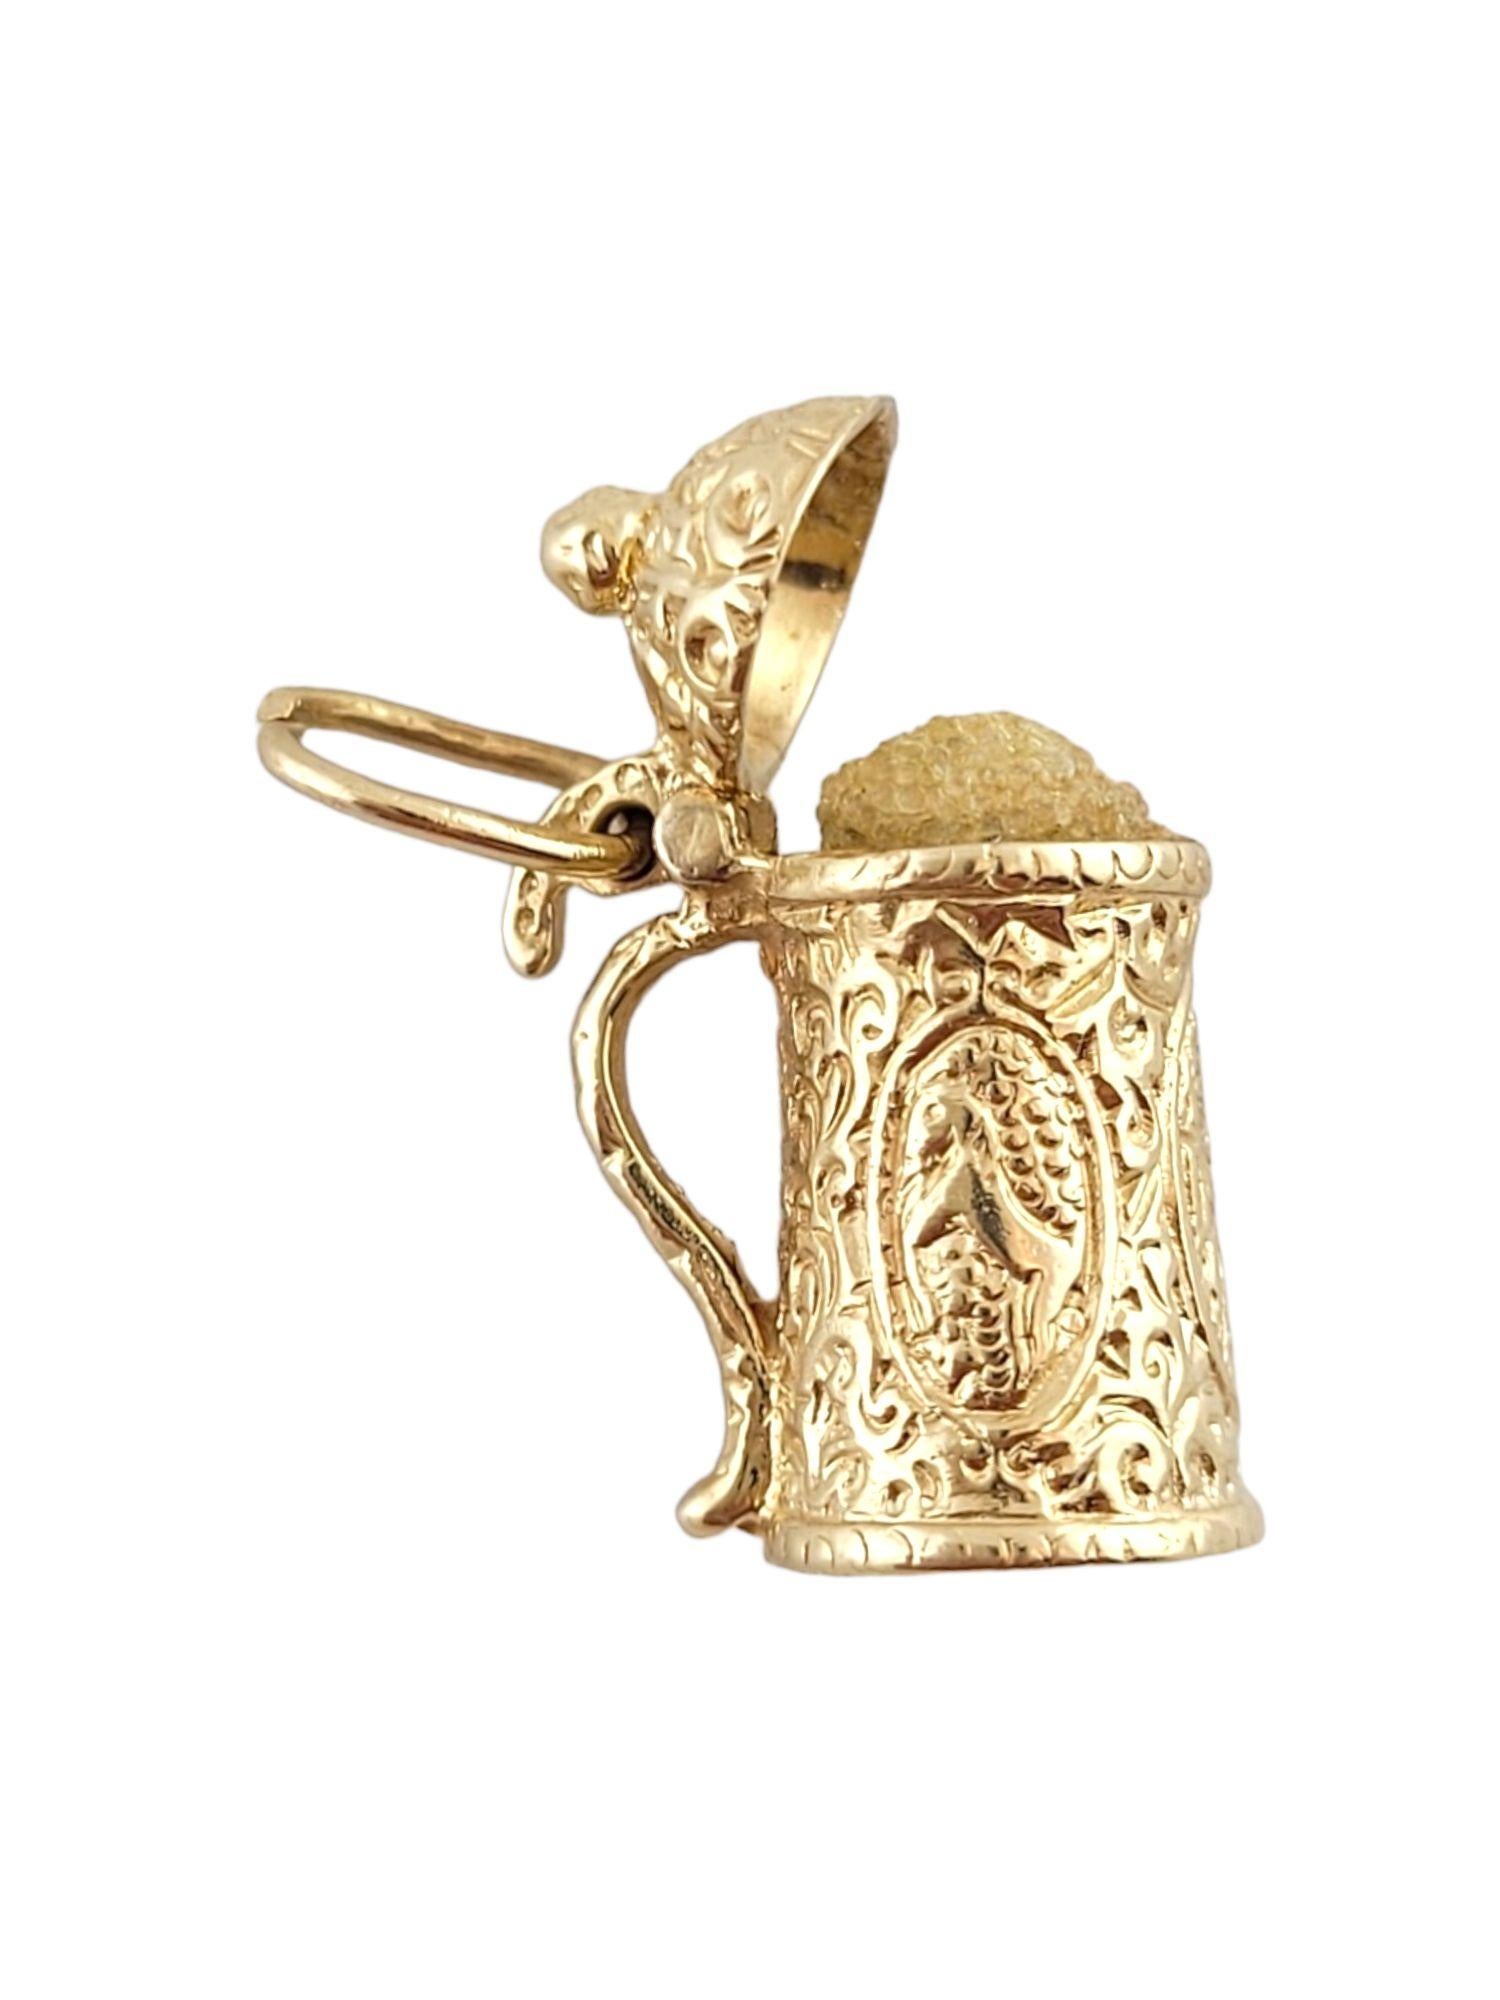 Vintage 14K Yellow Gold Mug Charm

This 14K gold mug charm is designed with a ton of beautiful and meticulous detailing!

Size: 16.7mm X 11.0mm X 7.6mm

Length w/ bail: 19.3mm

Weight: 3.58 g/ 2.3 dwt

Hallmark: A.C. 14K

Very good condition,